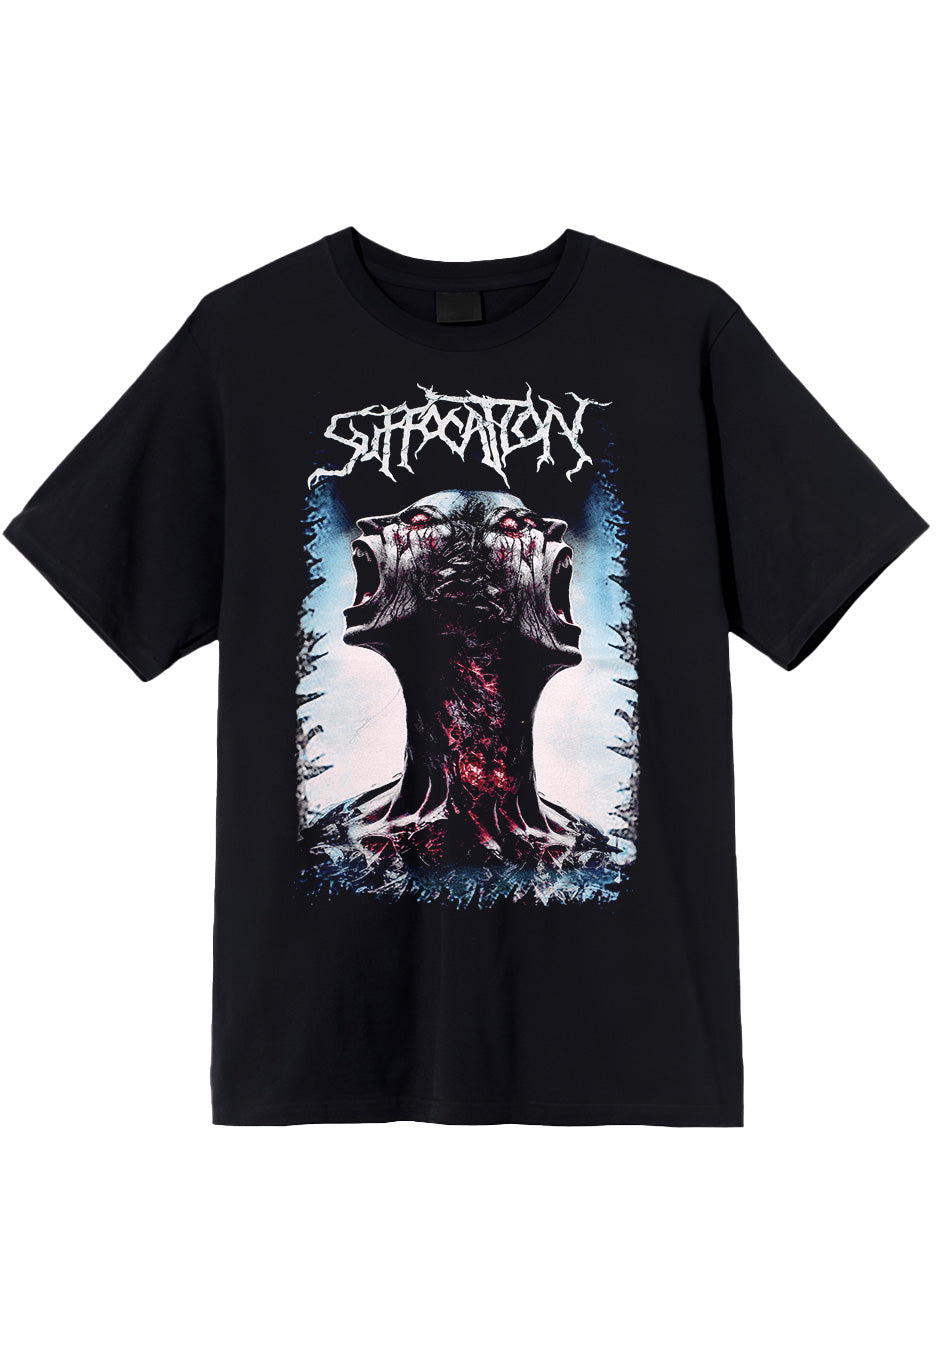 Suffocation - Screams - T-Shirt | Neutral-Image